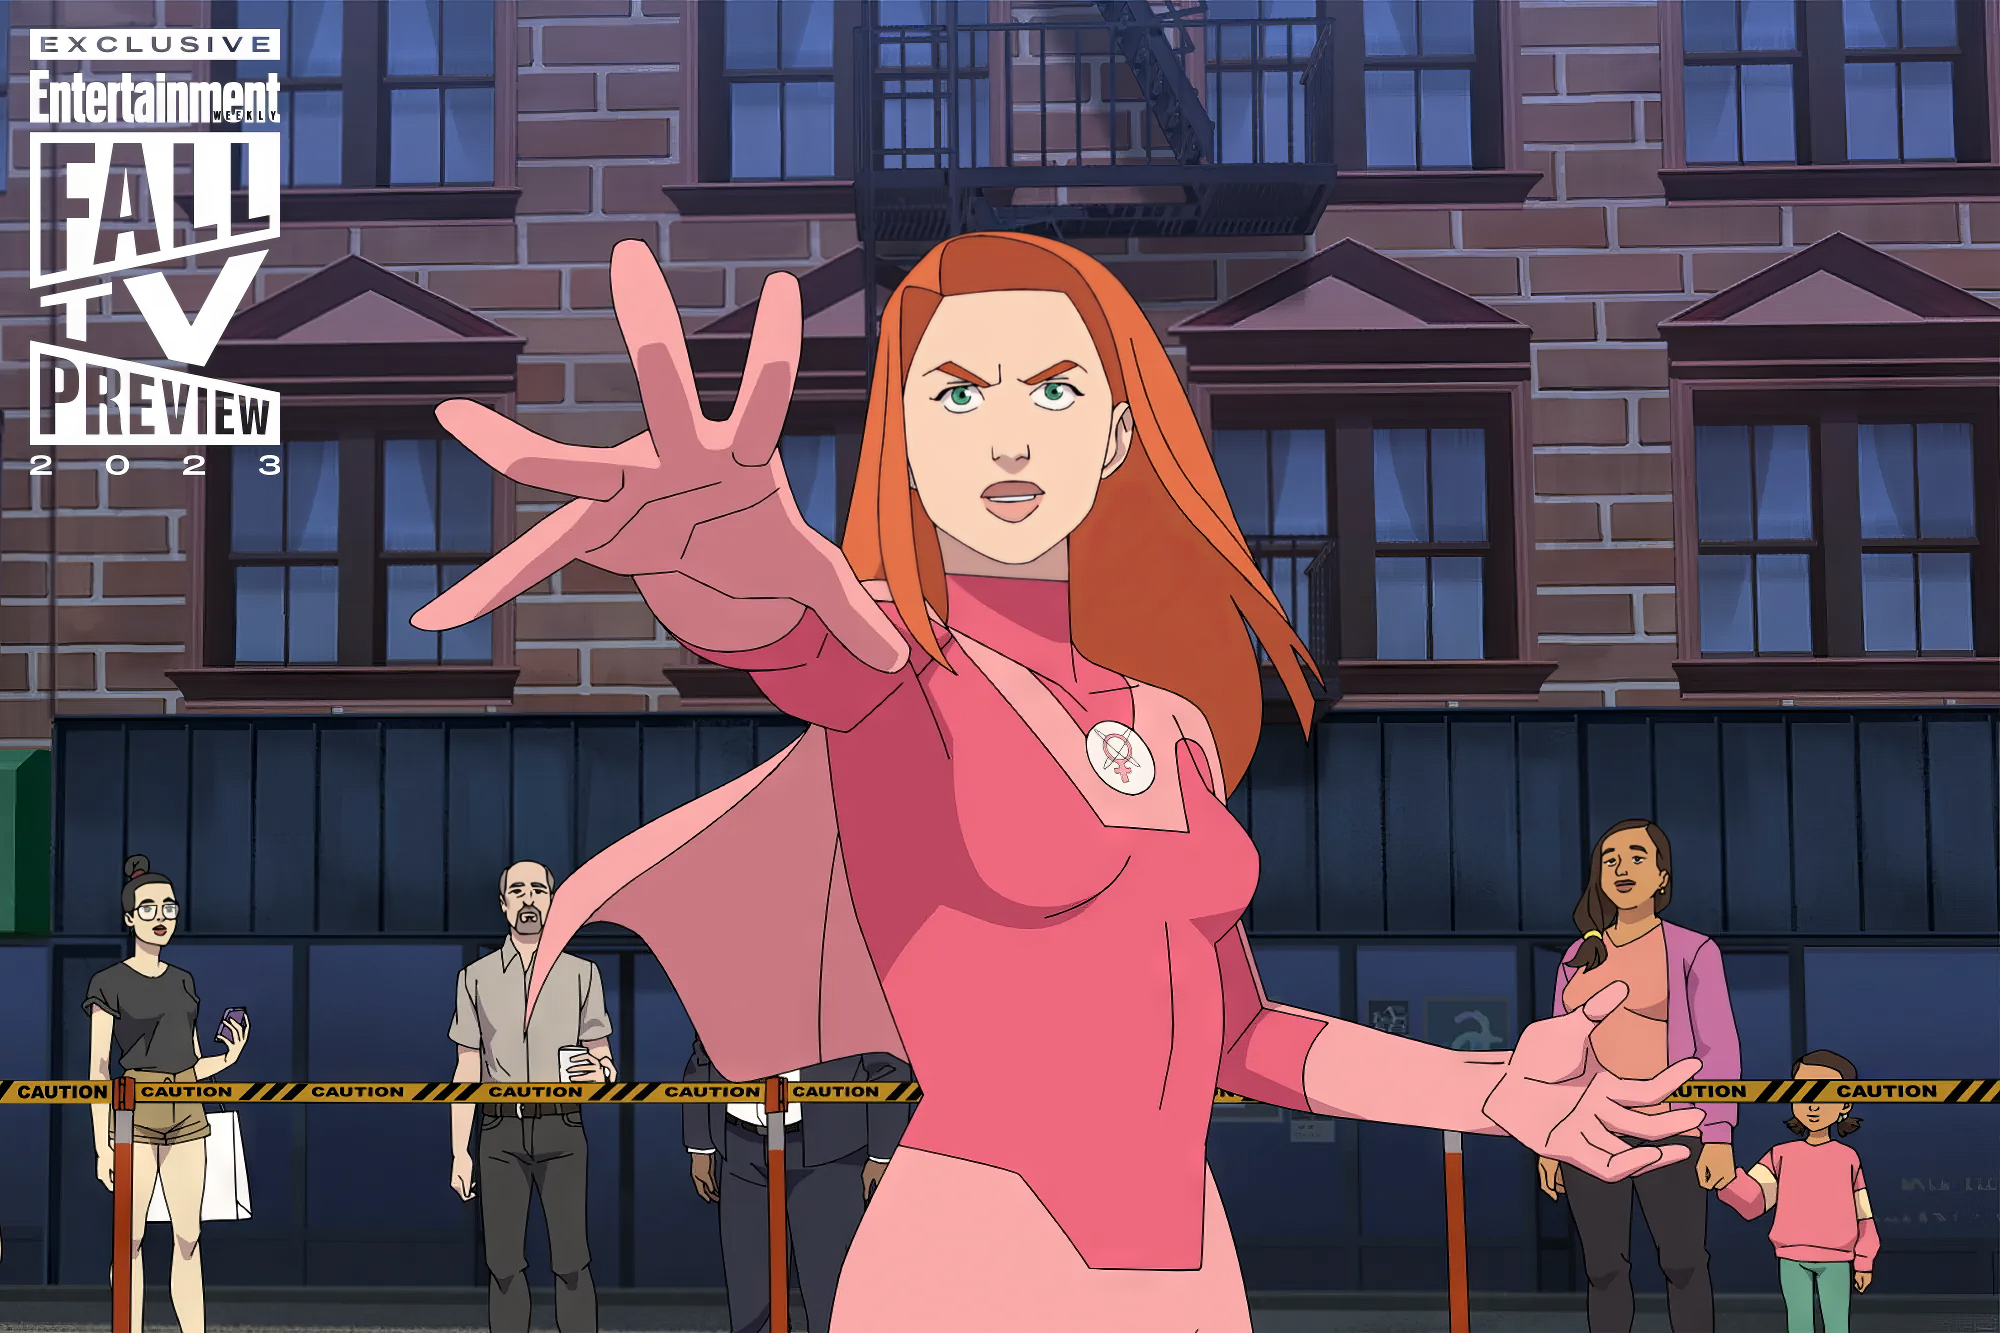 HD desktop wallpaper featuring the character Atom Eve from the Invincible series, portrayed in her distinctive pink costume with her hand extended, against an urban backdrop with onlookers.